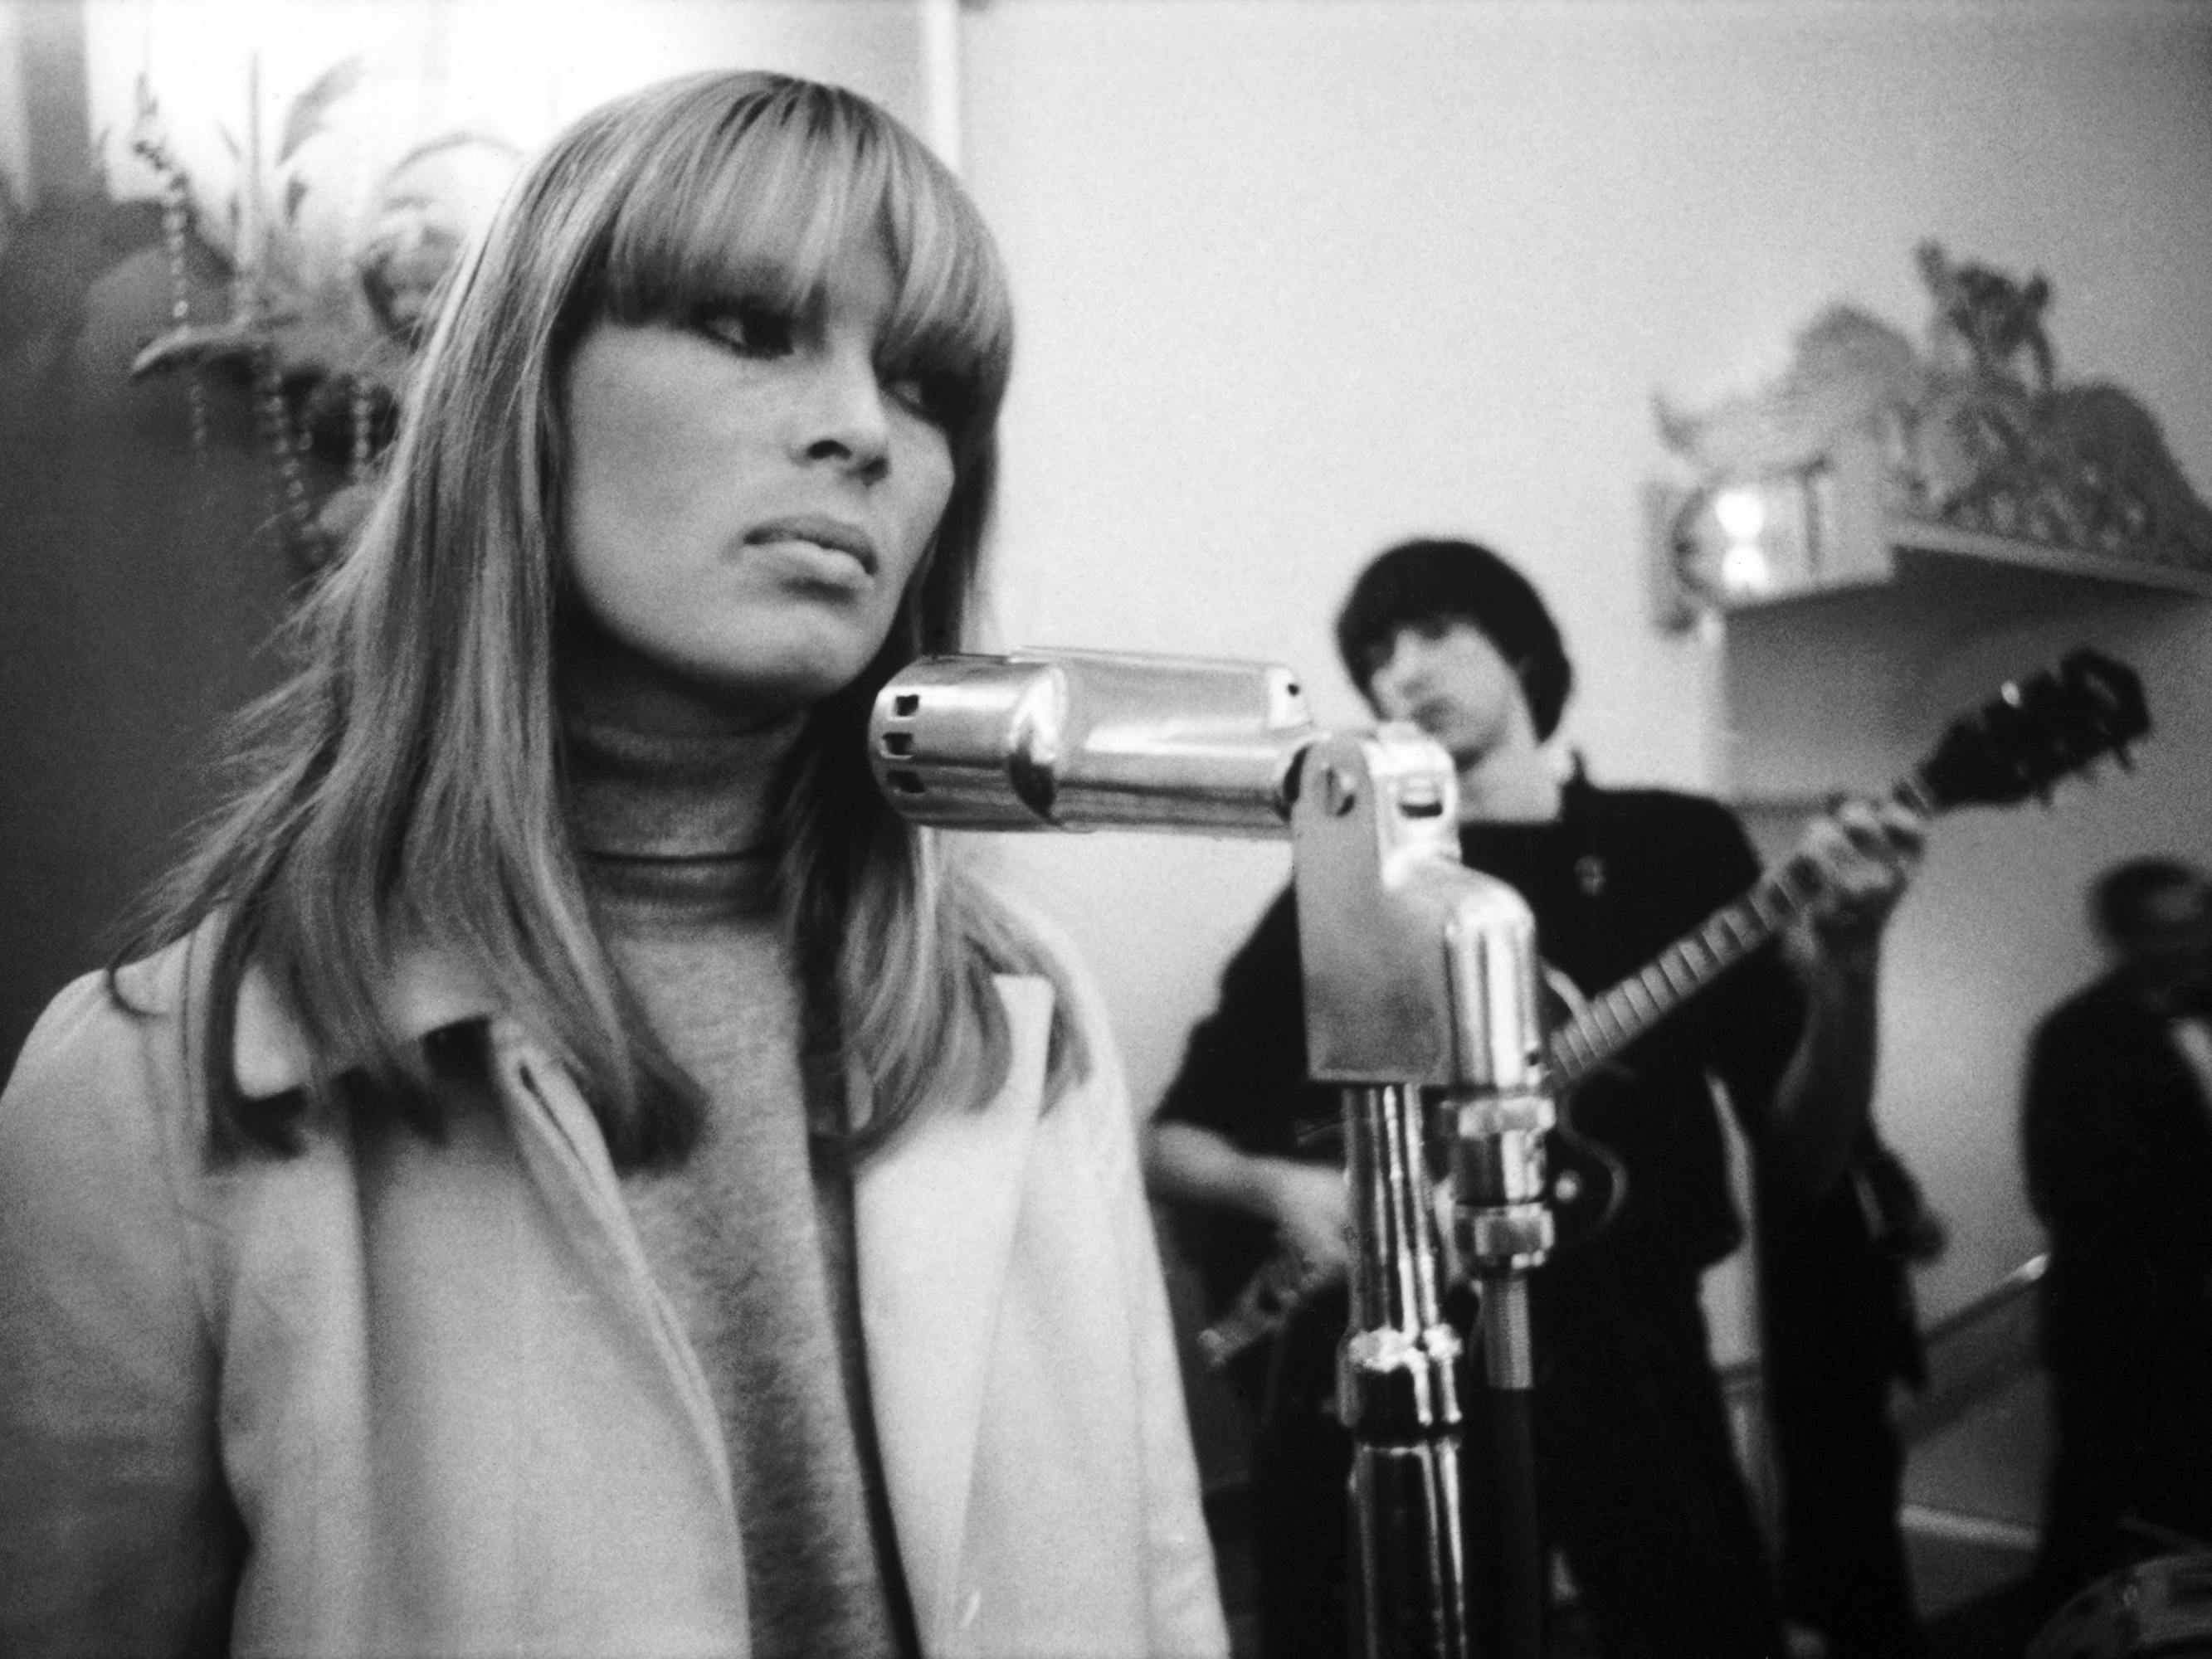 Nico wears a turtleneck and sings into a mic in this black-and-white image.